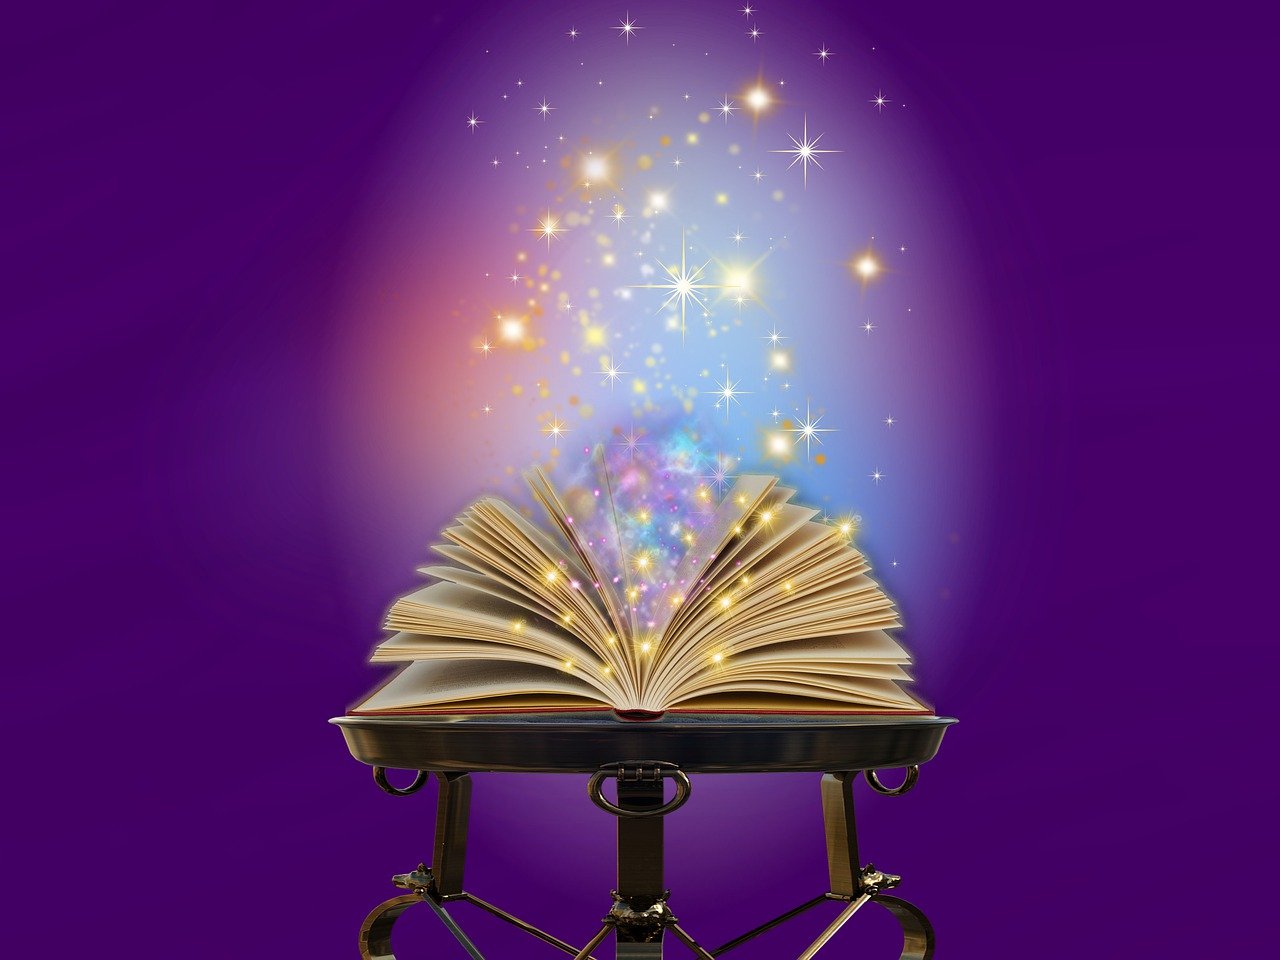 Picture of a magical spell book opening with sparkles against a purple background